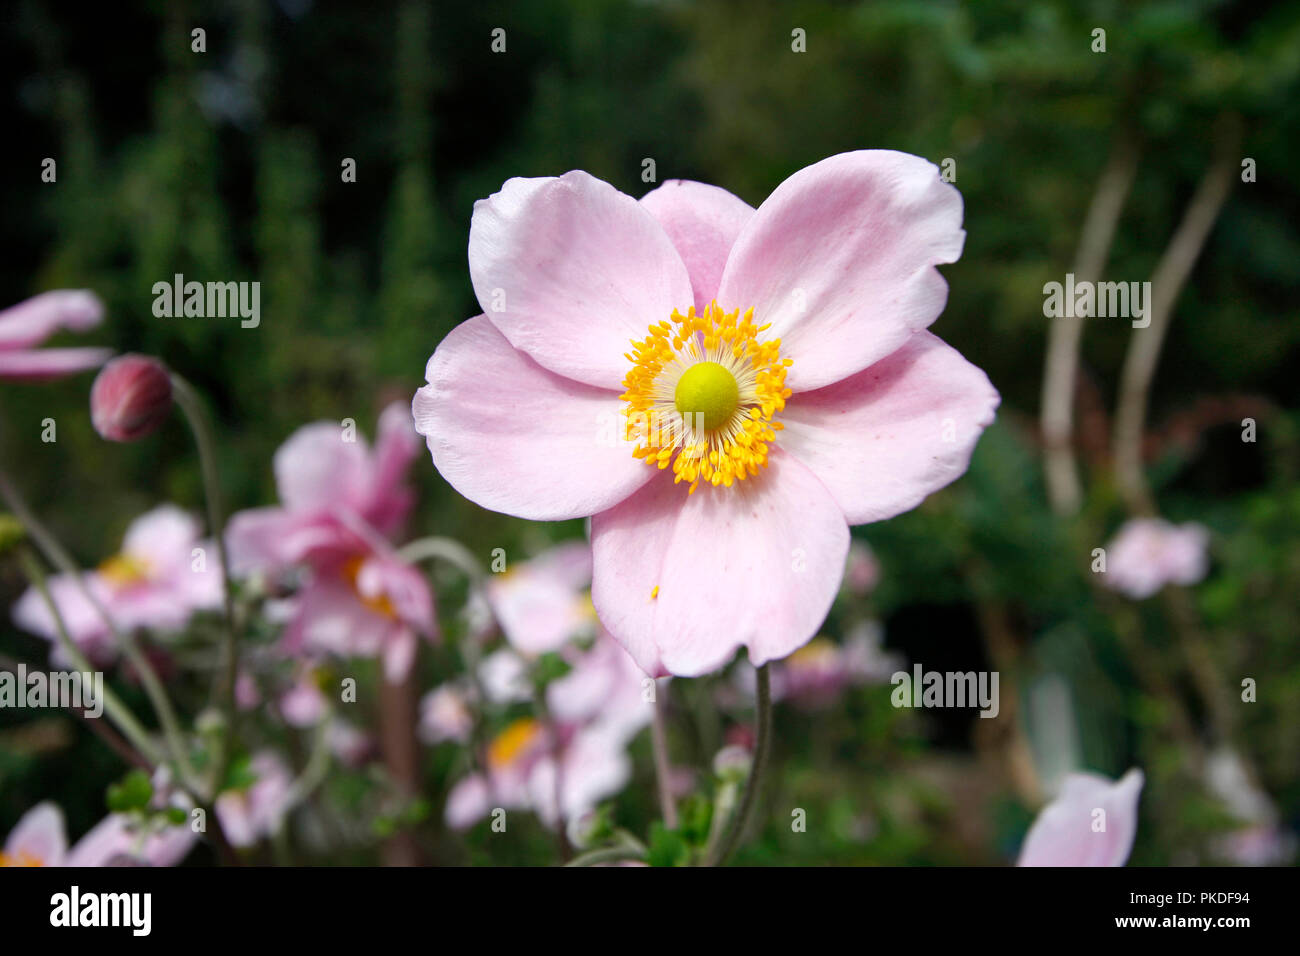 Close up of a colourful pink Japanese anemone flower close up with yellow stamen and green carpel Stock Photo